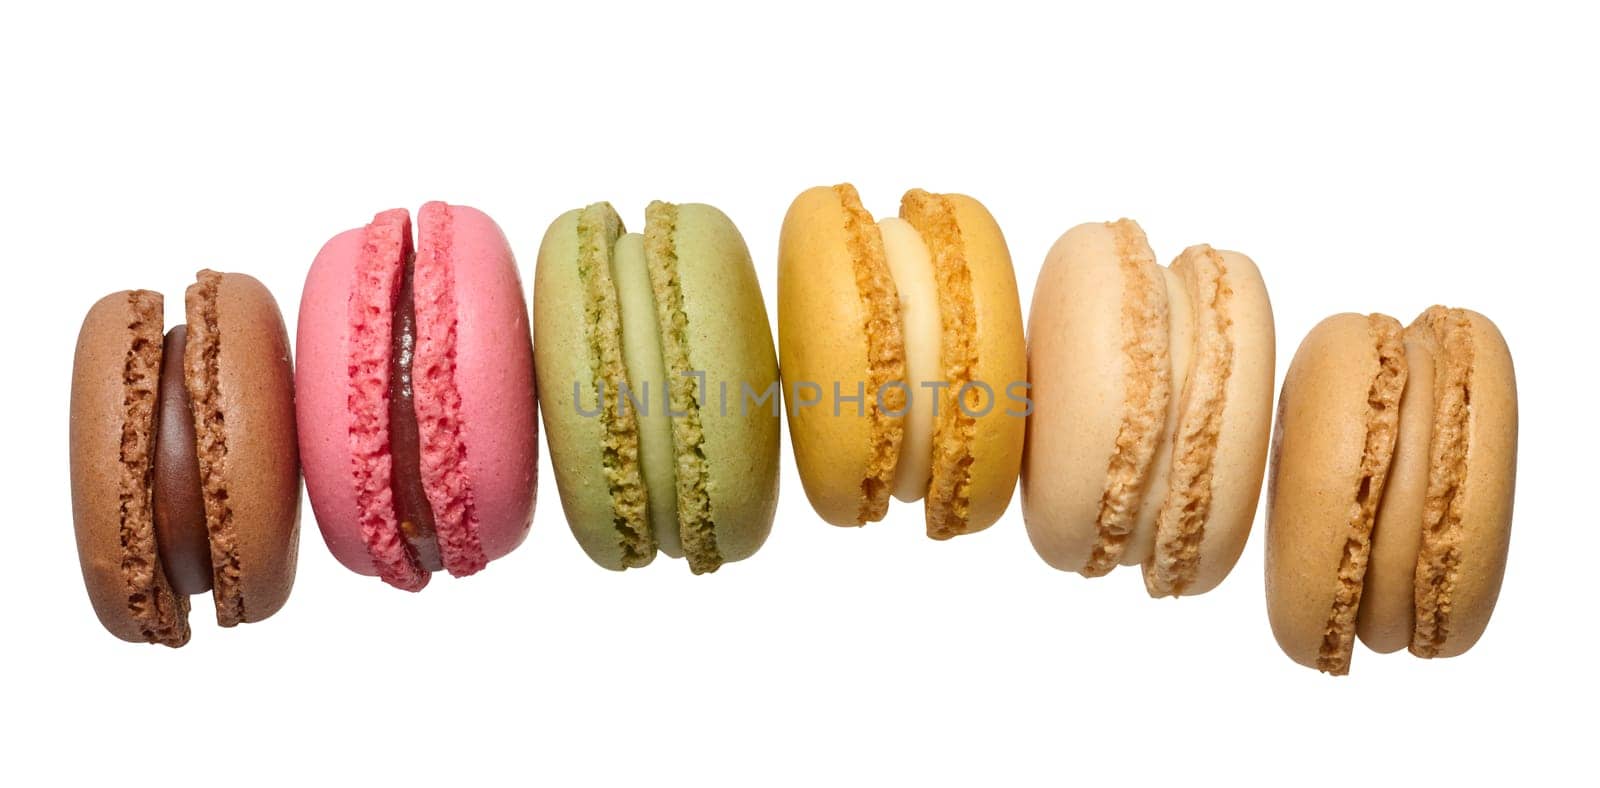 Multicolored baked macarons on isolated background by ndanko